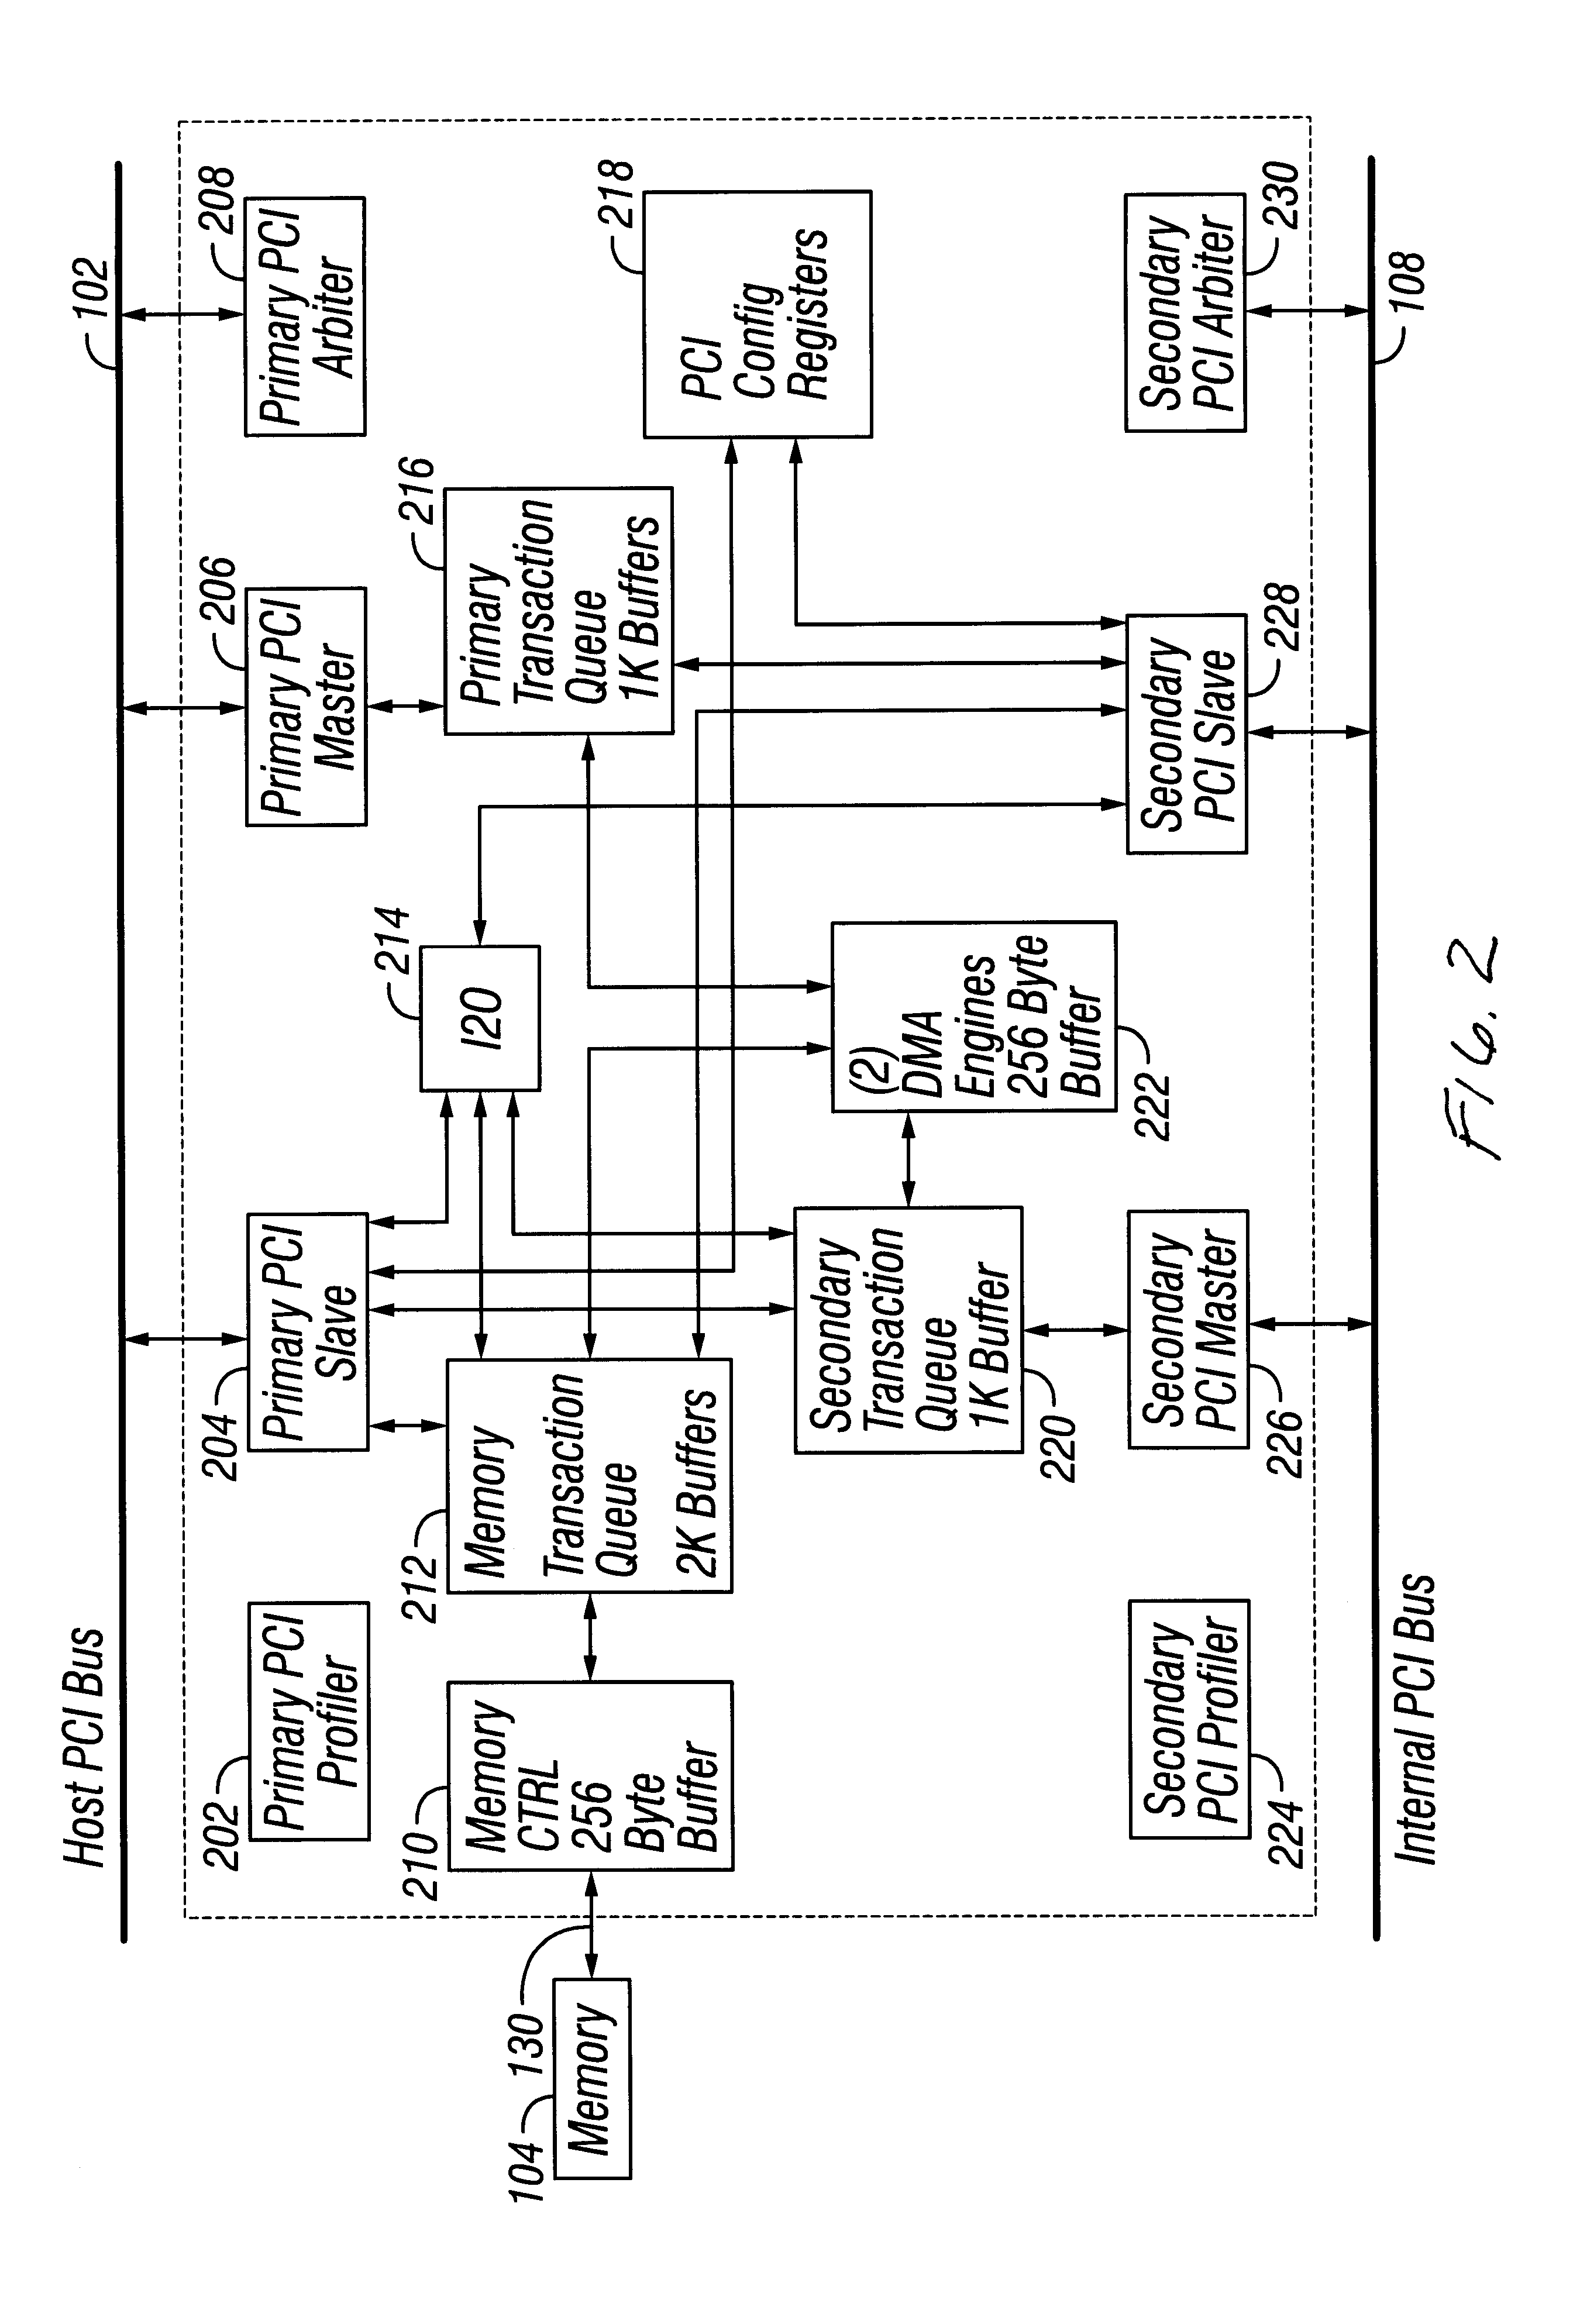 Raid XOR operations to synchronous DRAM using a read buffer and pipelining of synchronous DRAM burst read data